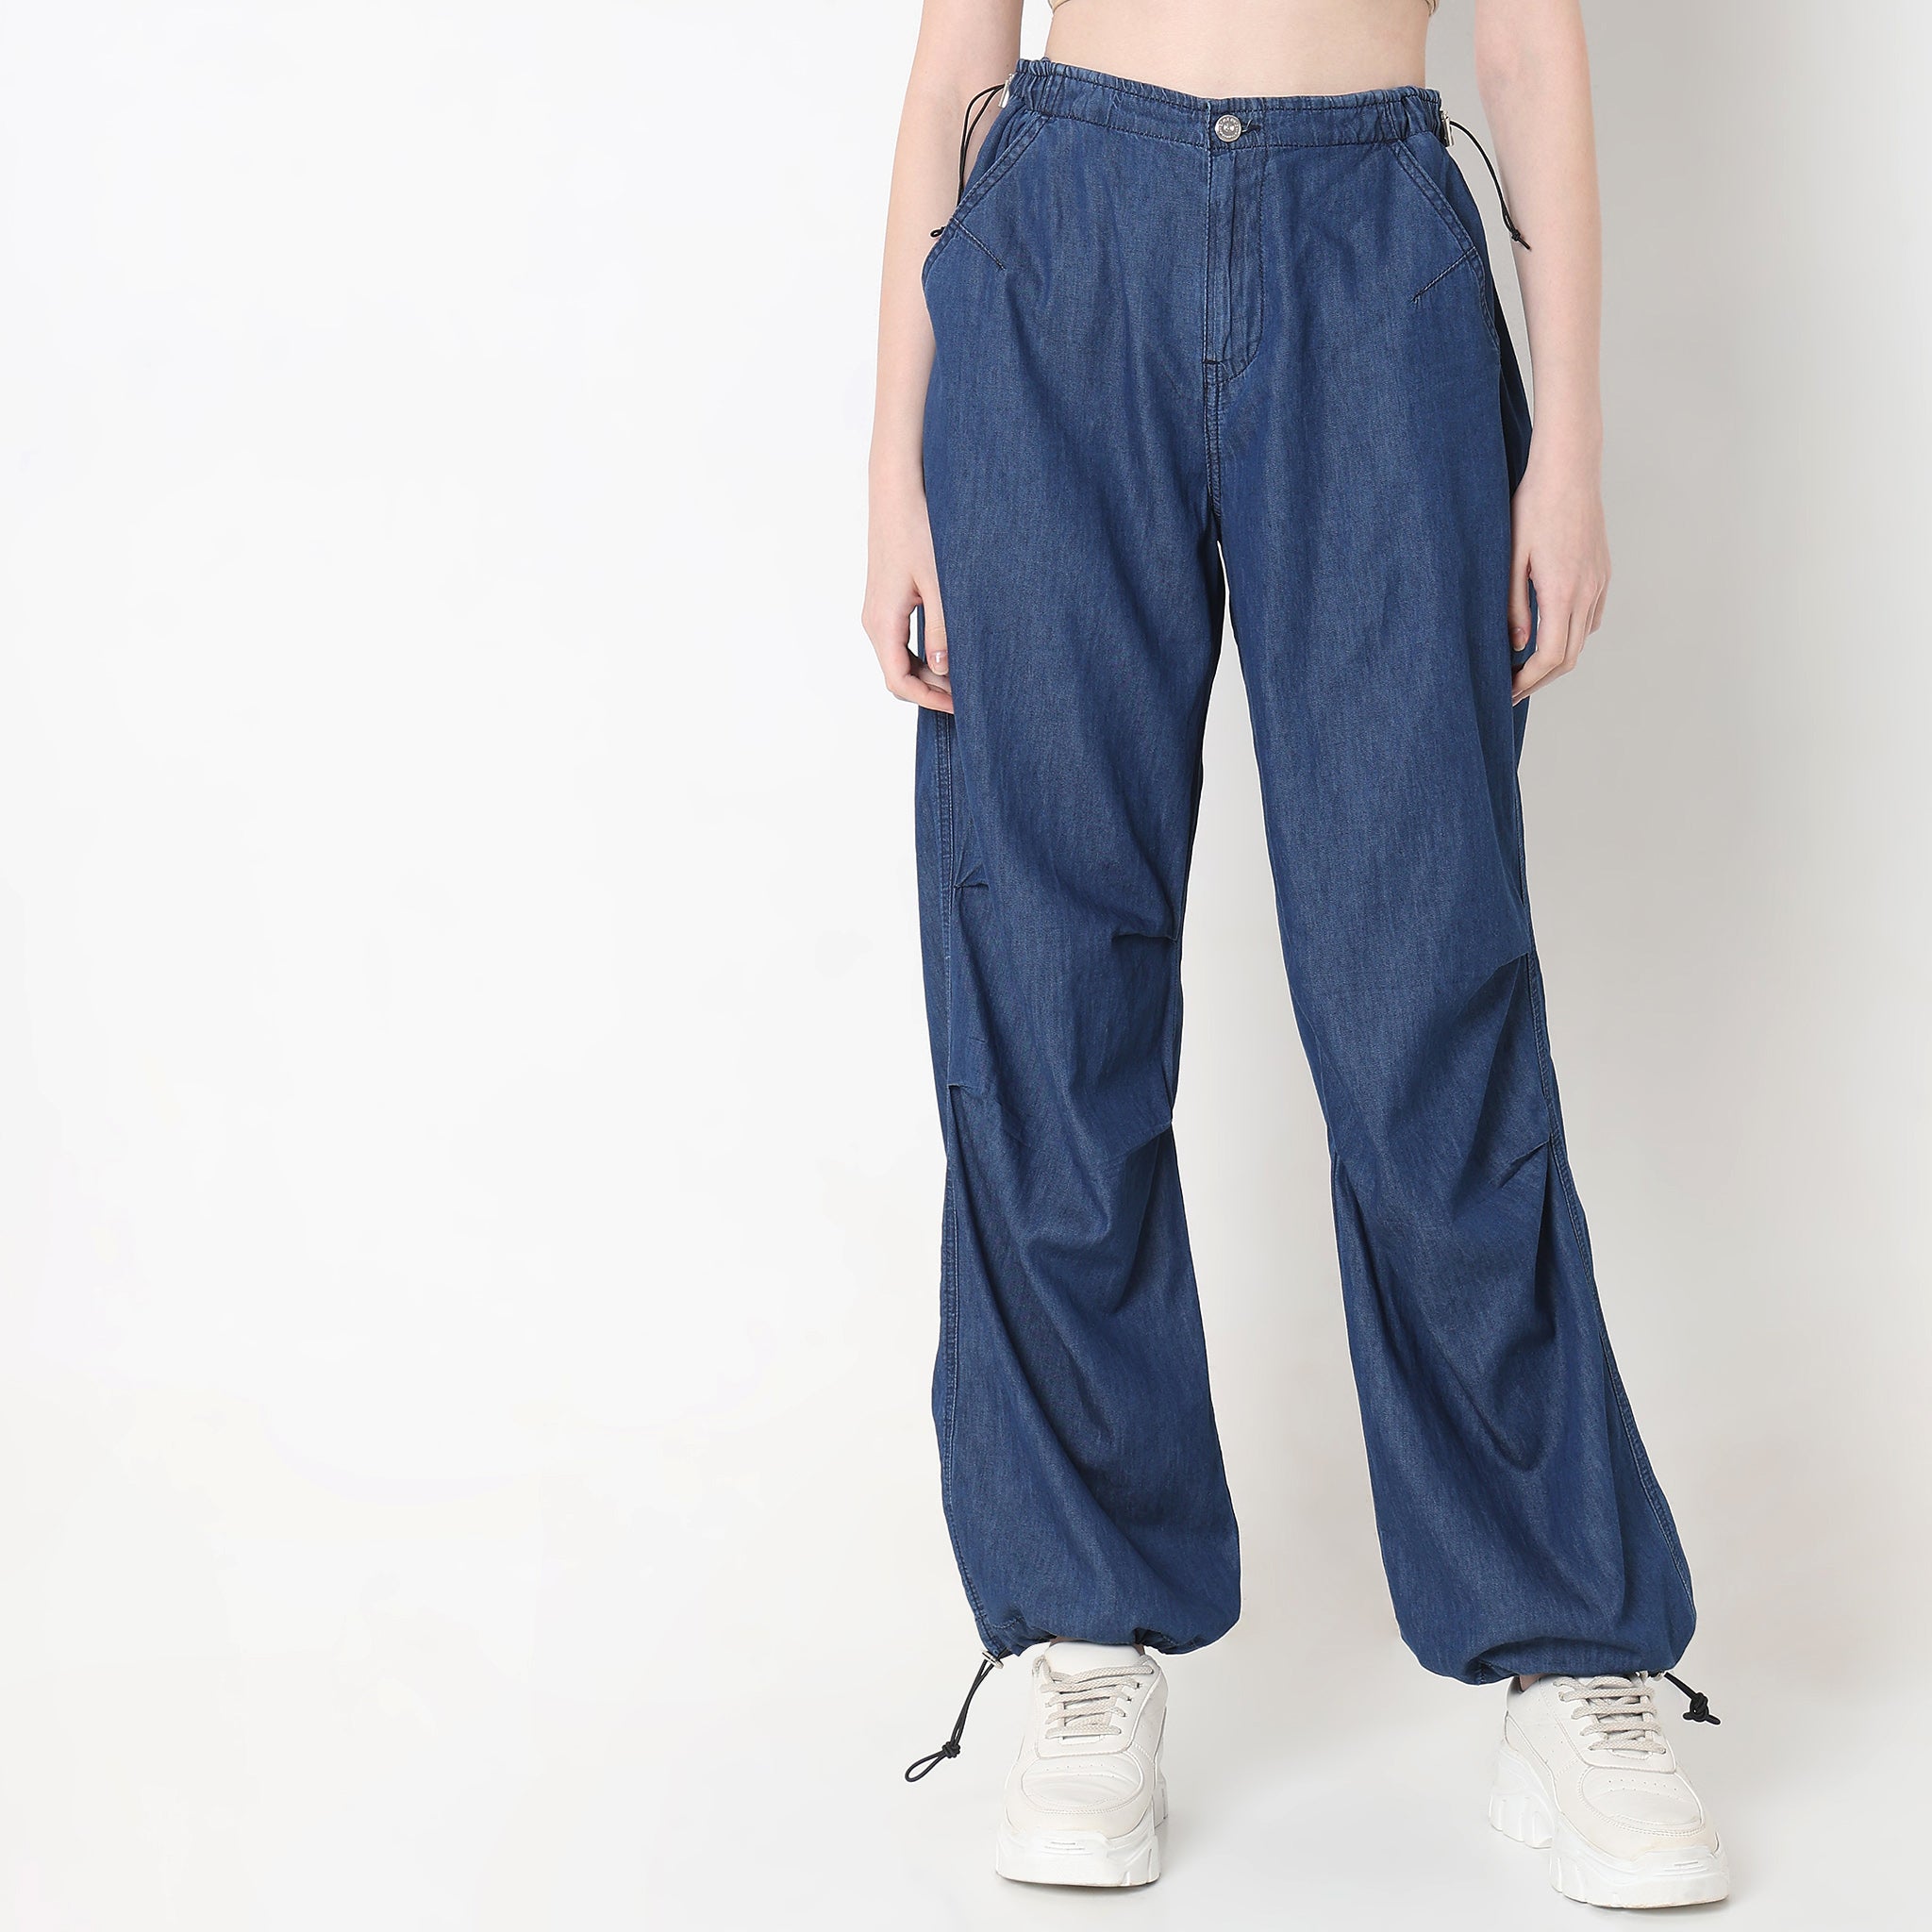 Baggy Fit Solid Jeans